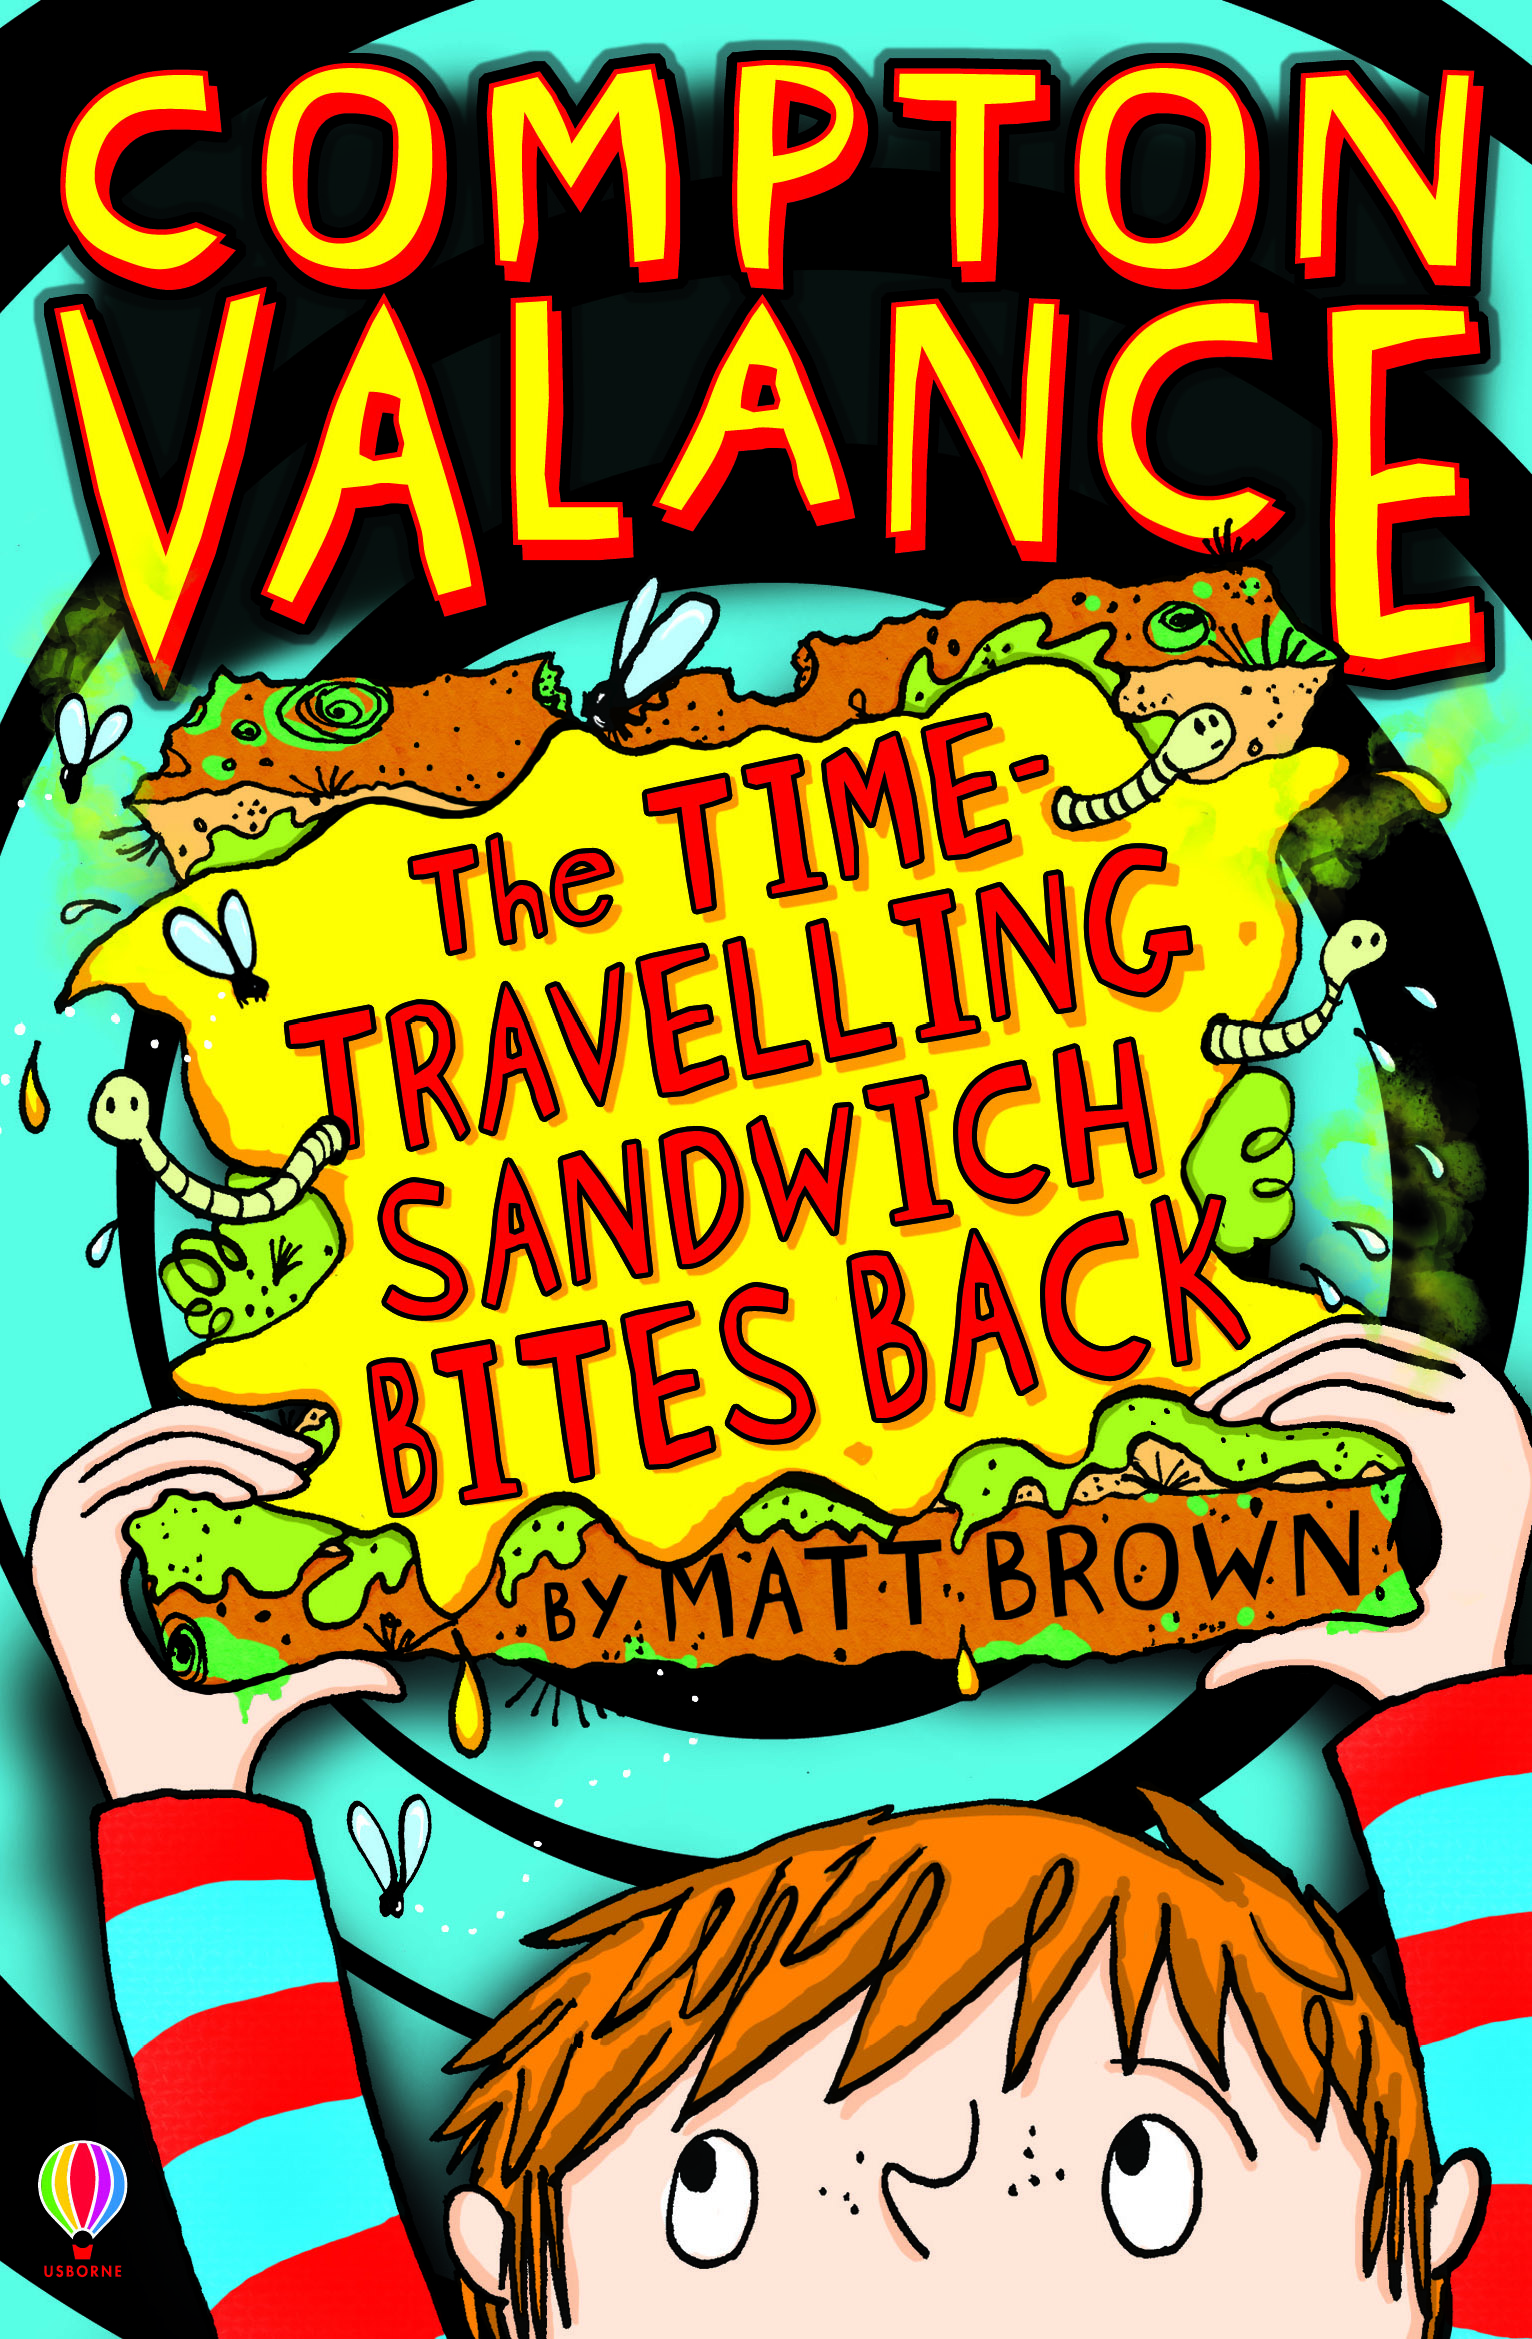 The Time Travelling Sandwich Bites Back